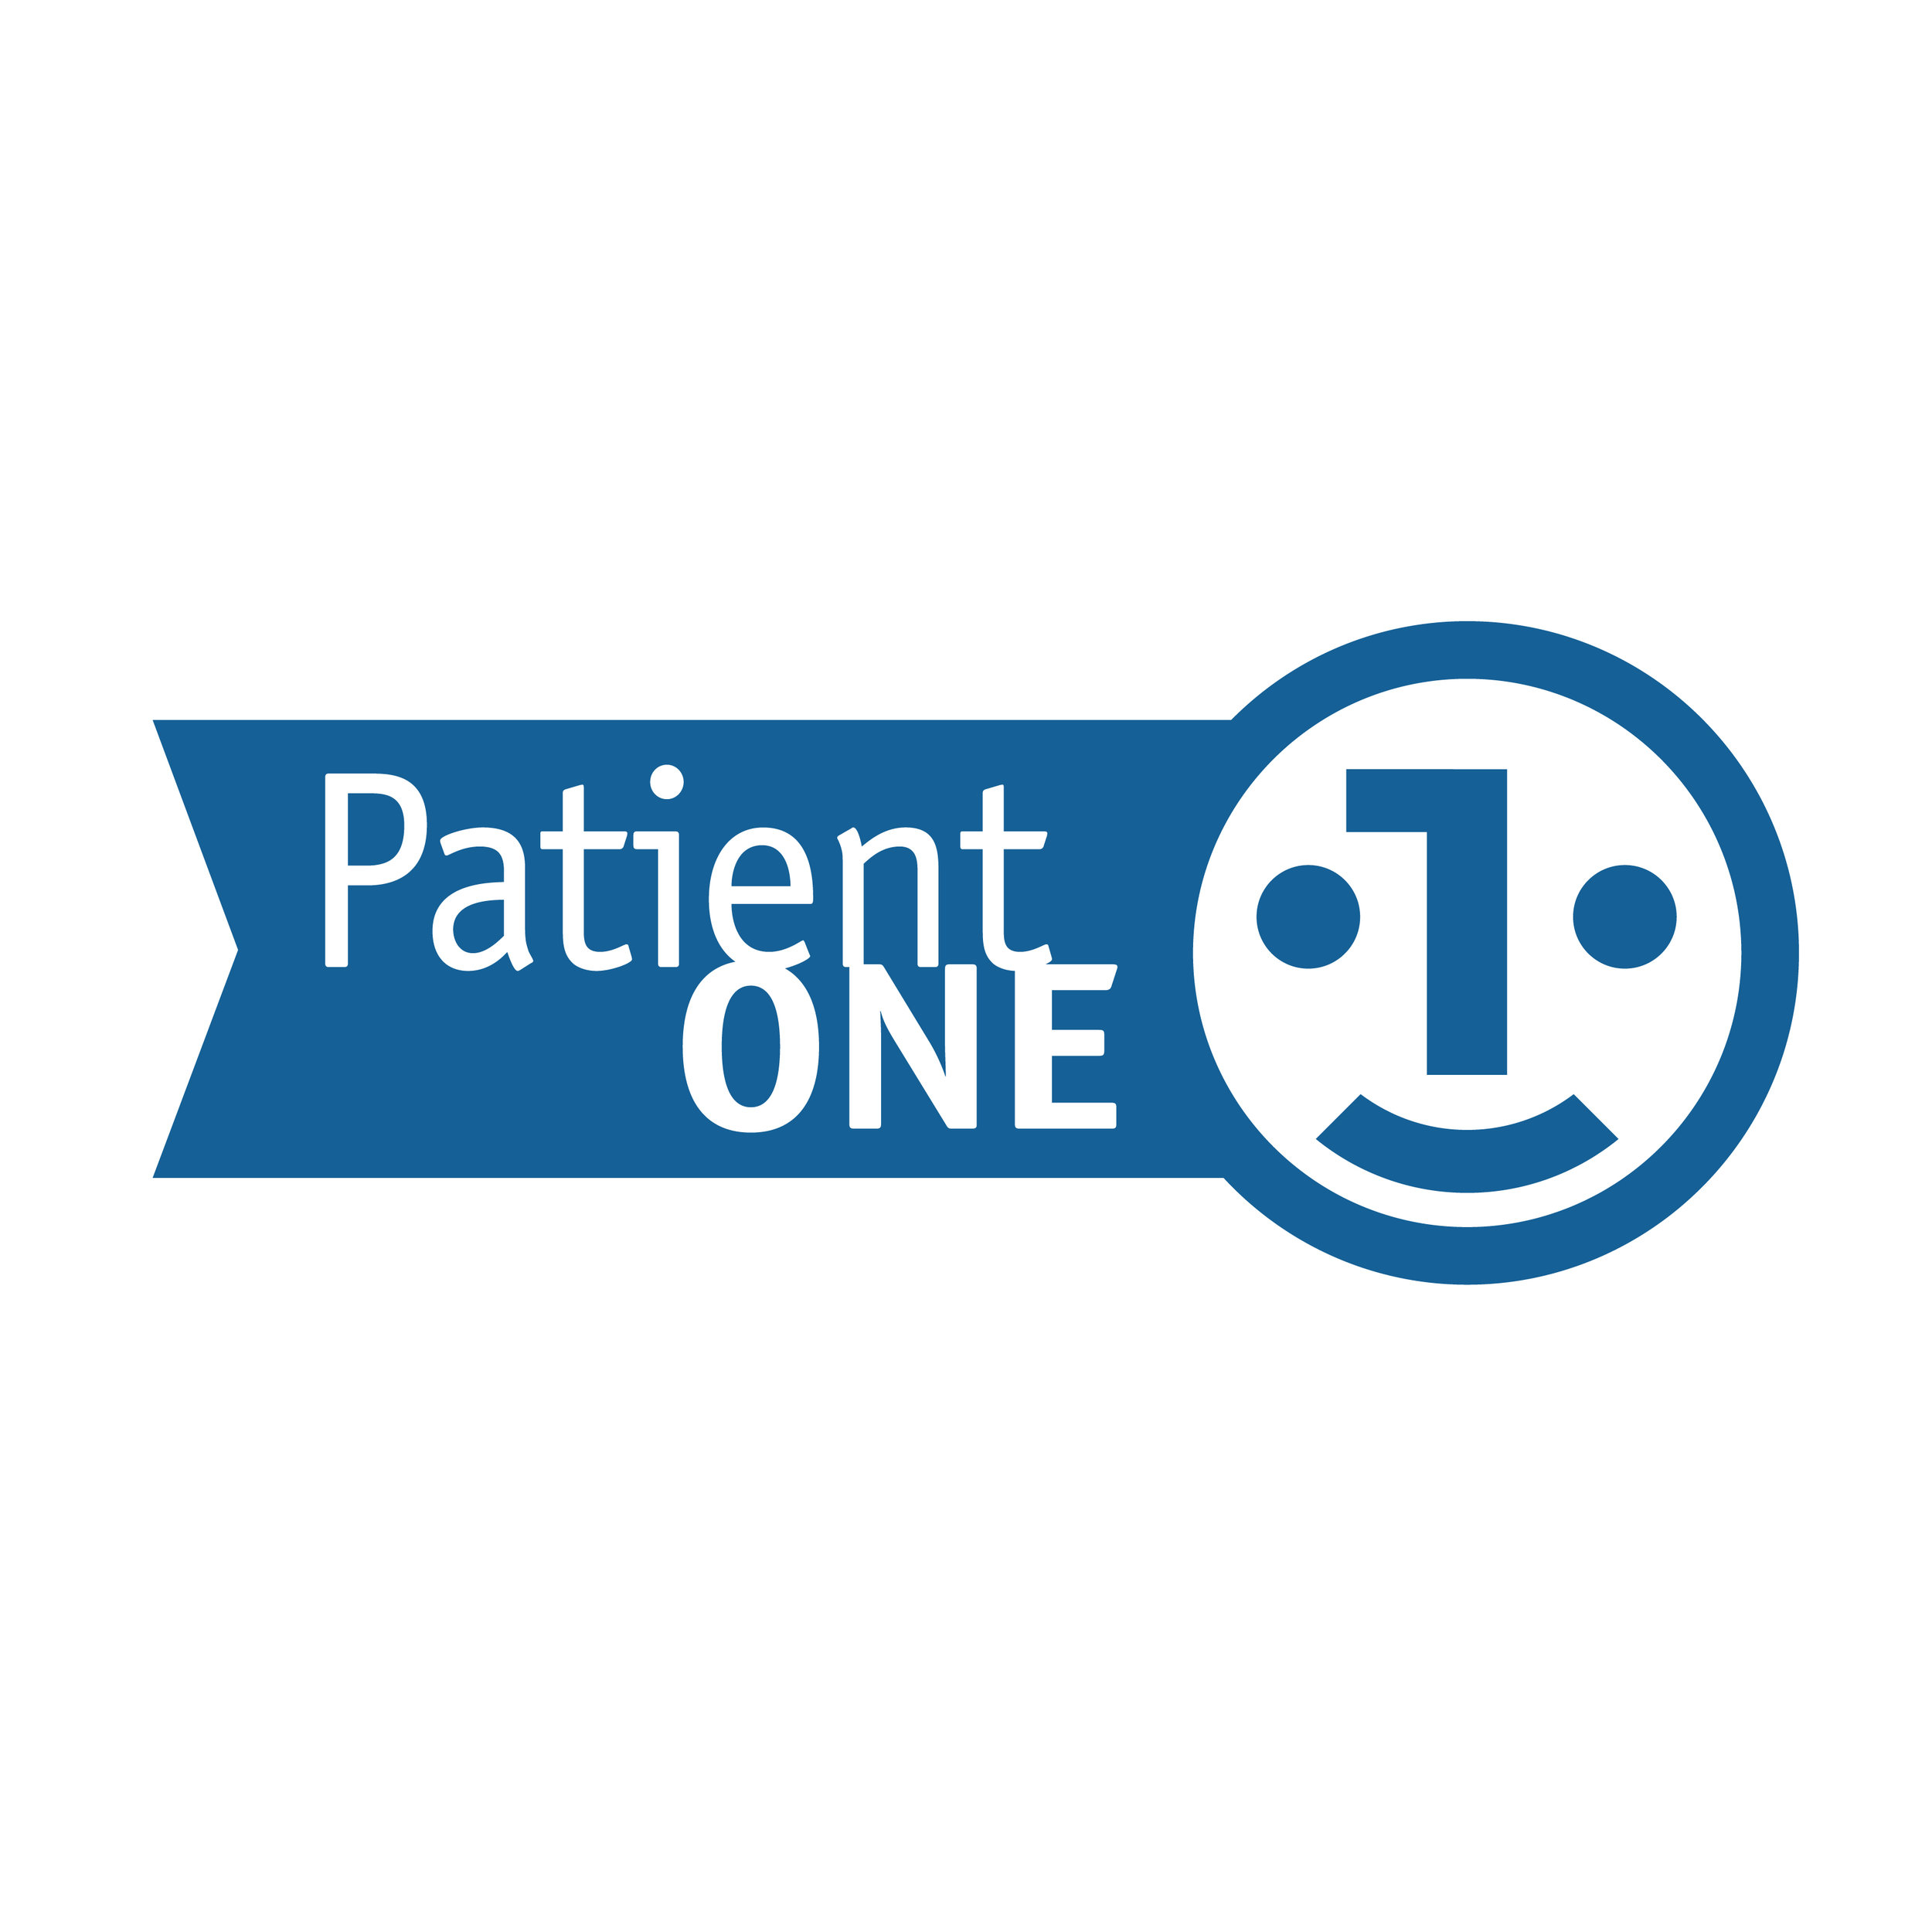  Patient One services  The MED, Regional Medical Center at Memphis   Branding creative and design by Chuck Mitchell 